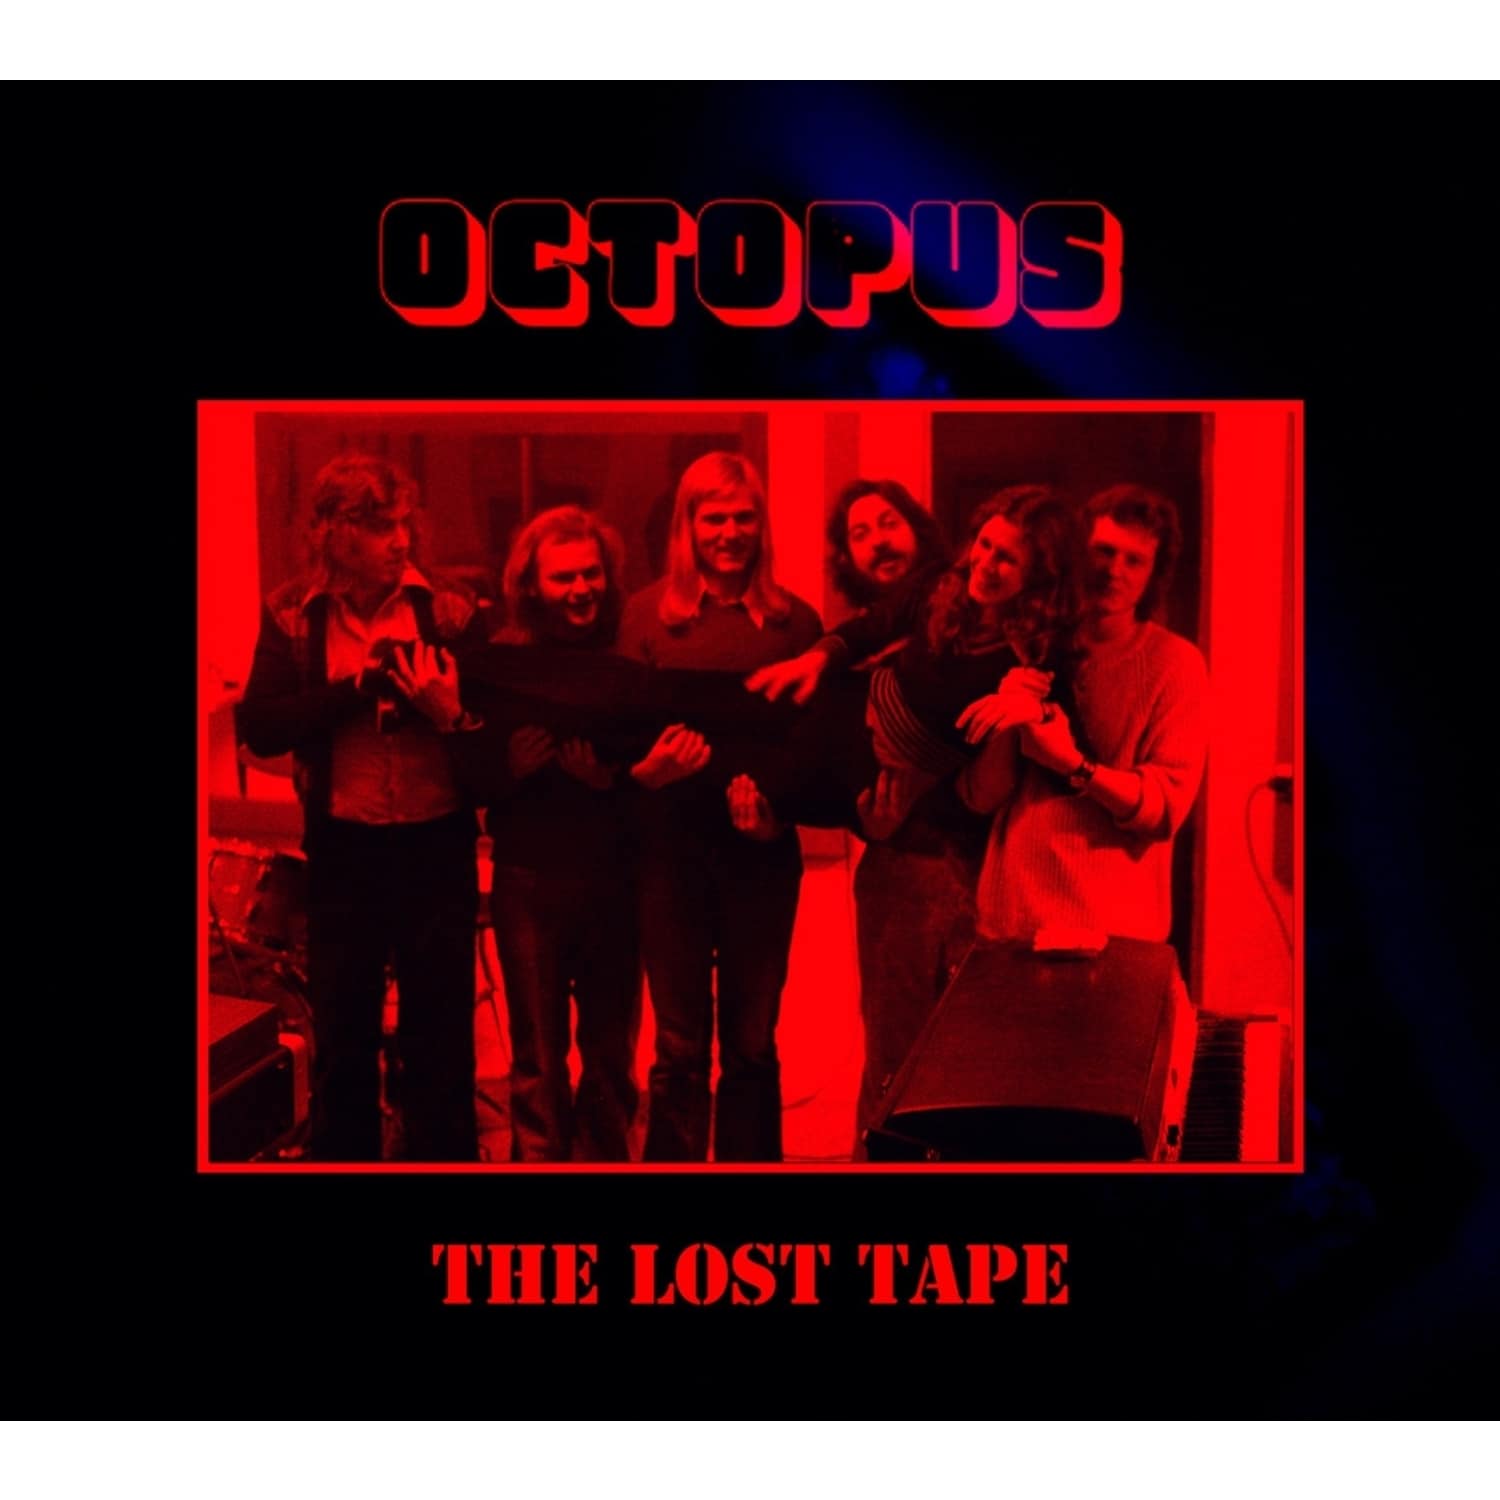 Octopus - THE LOST TAPE 